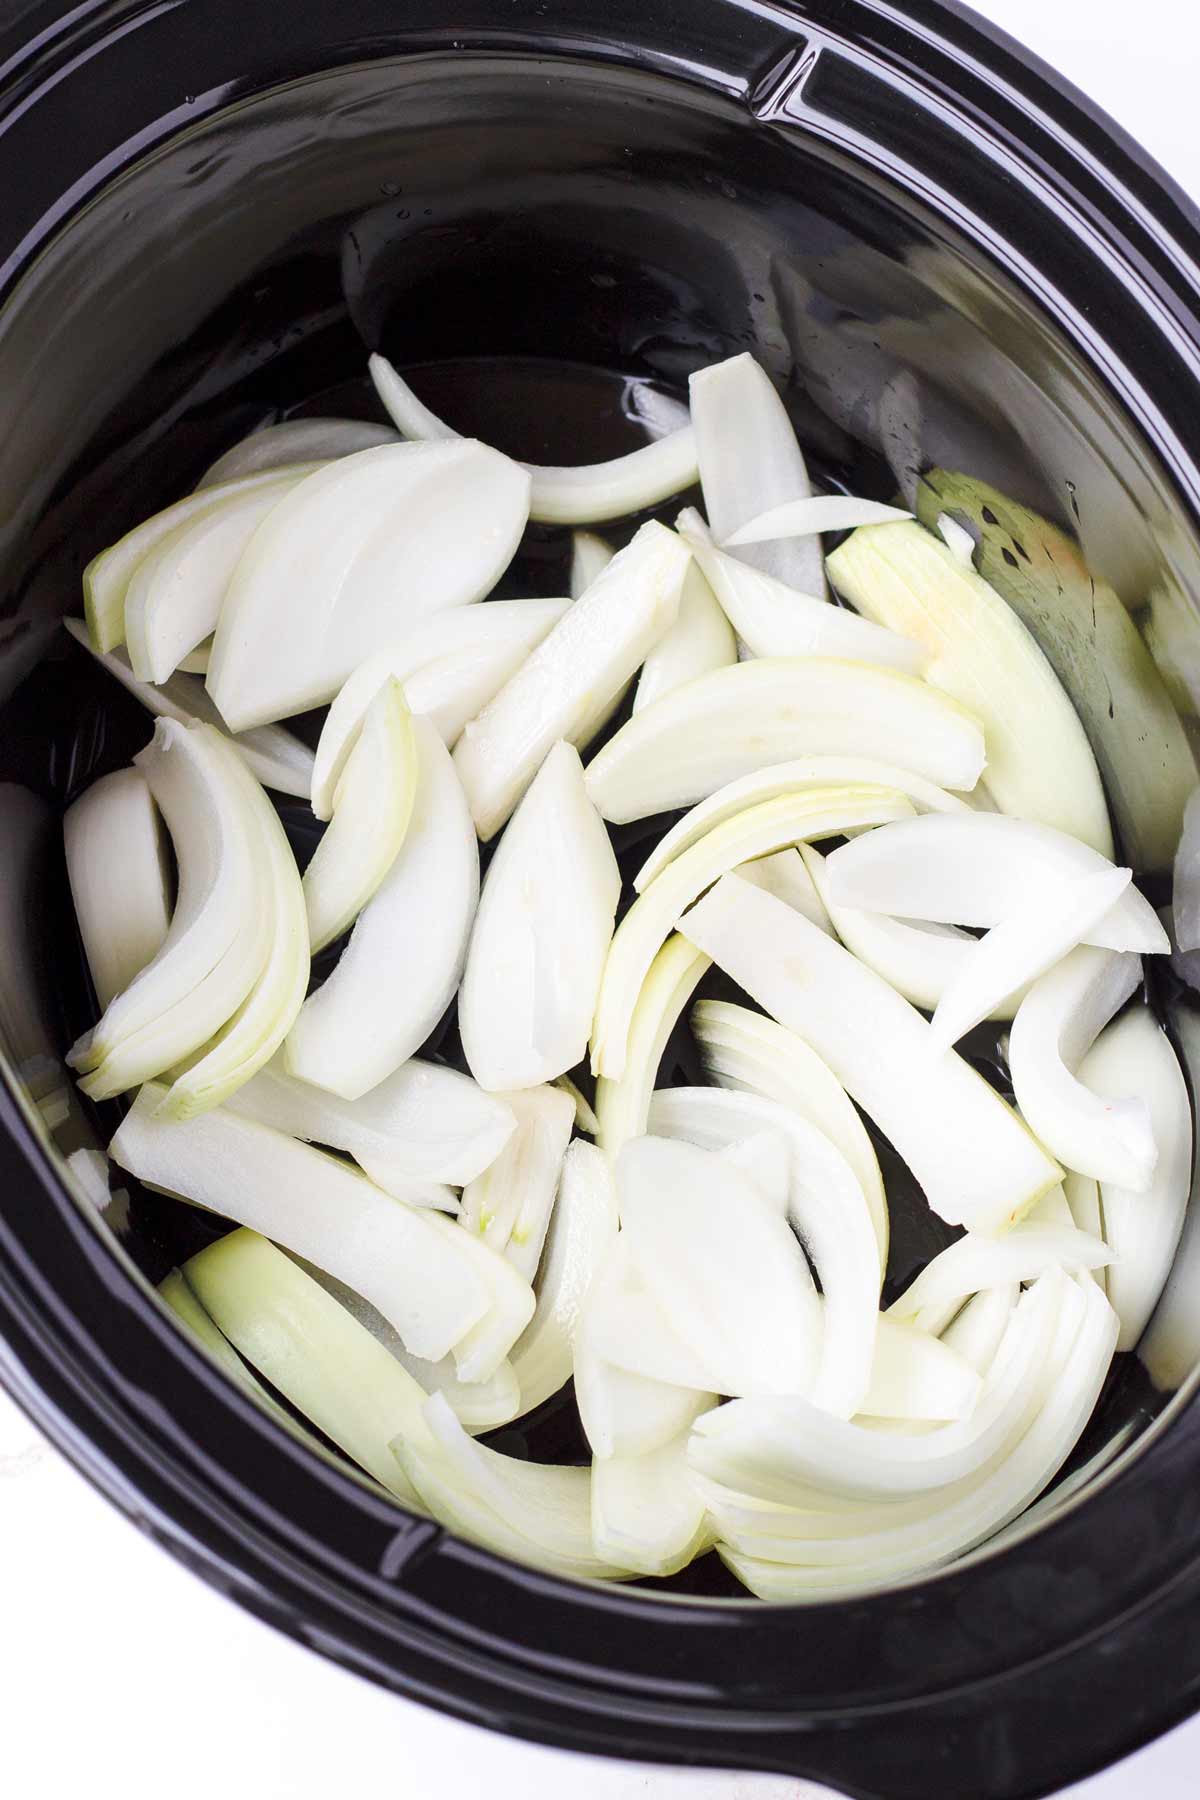 sliced raw onions in a large oval shaped slow cooker